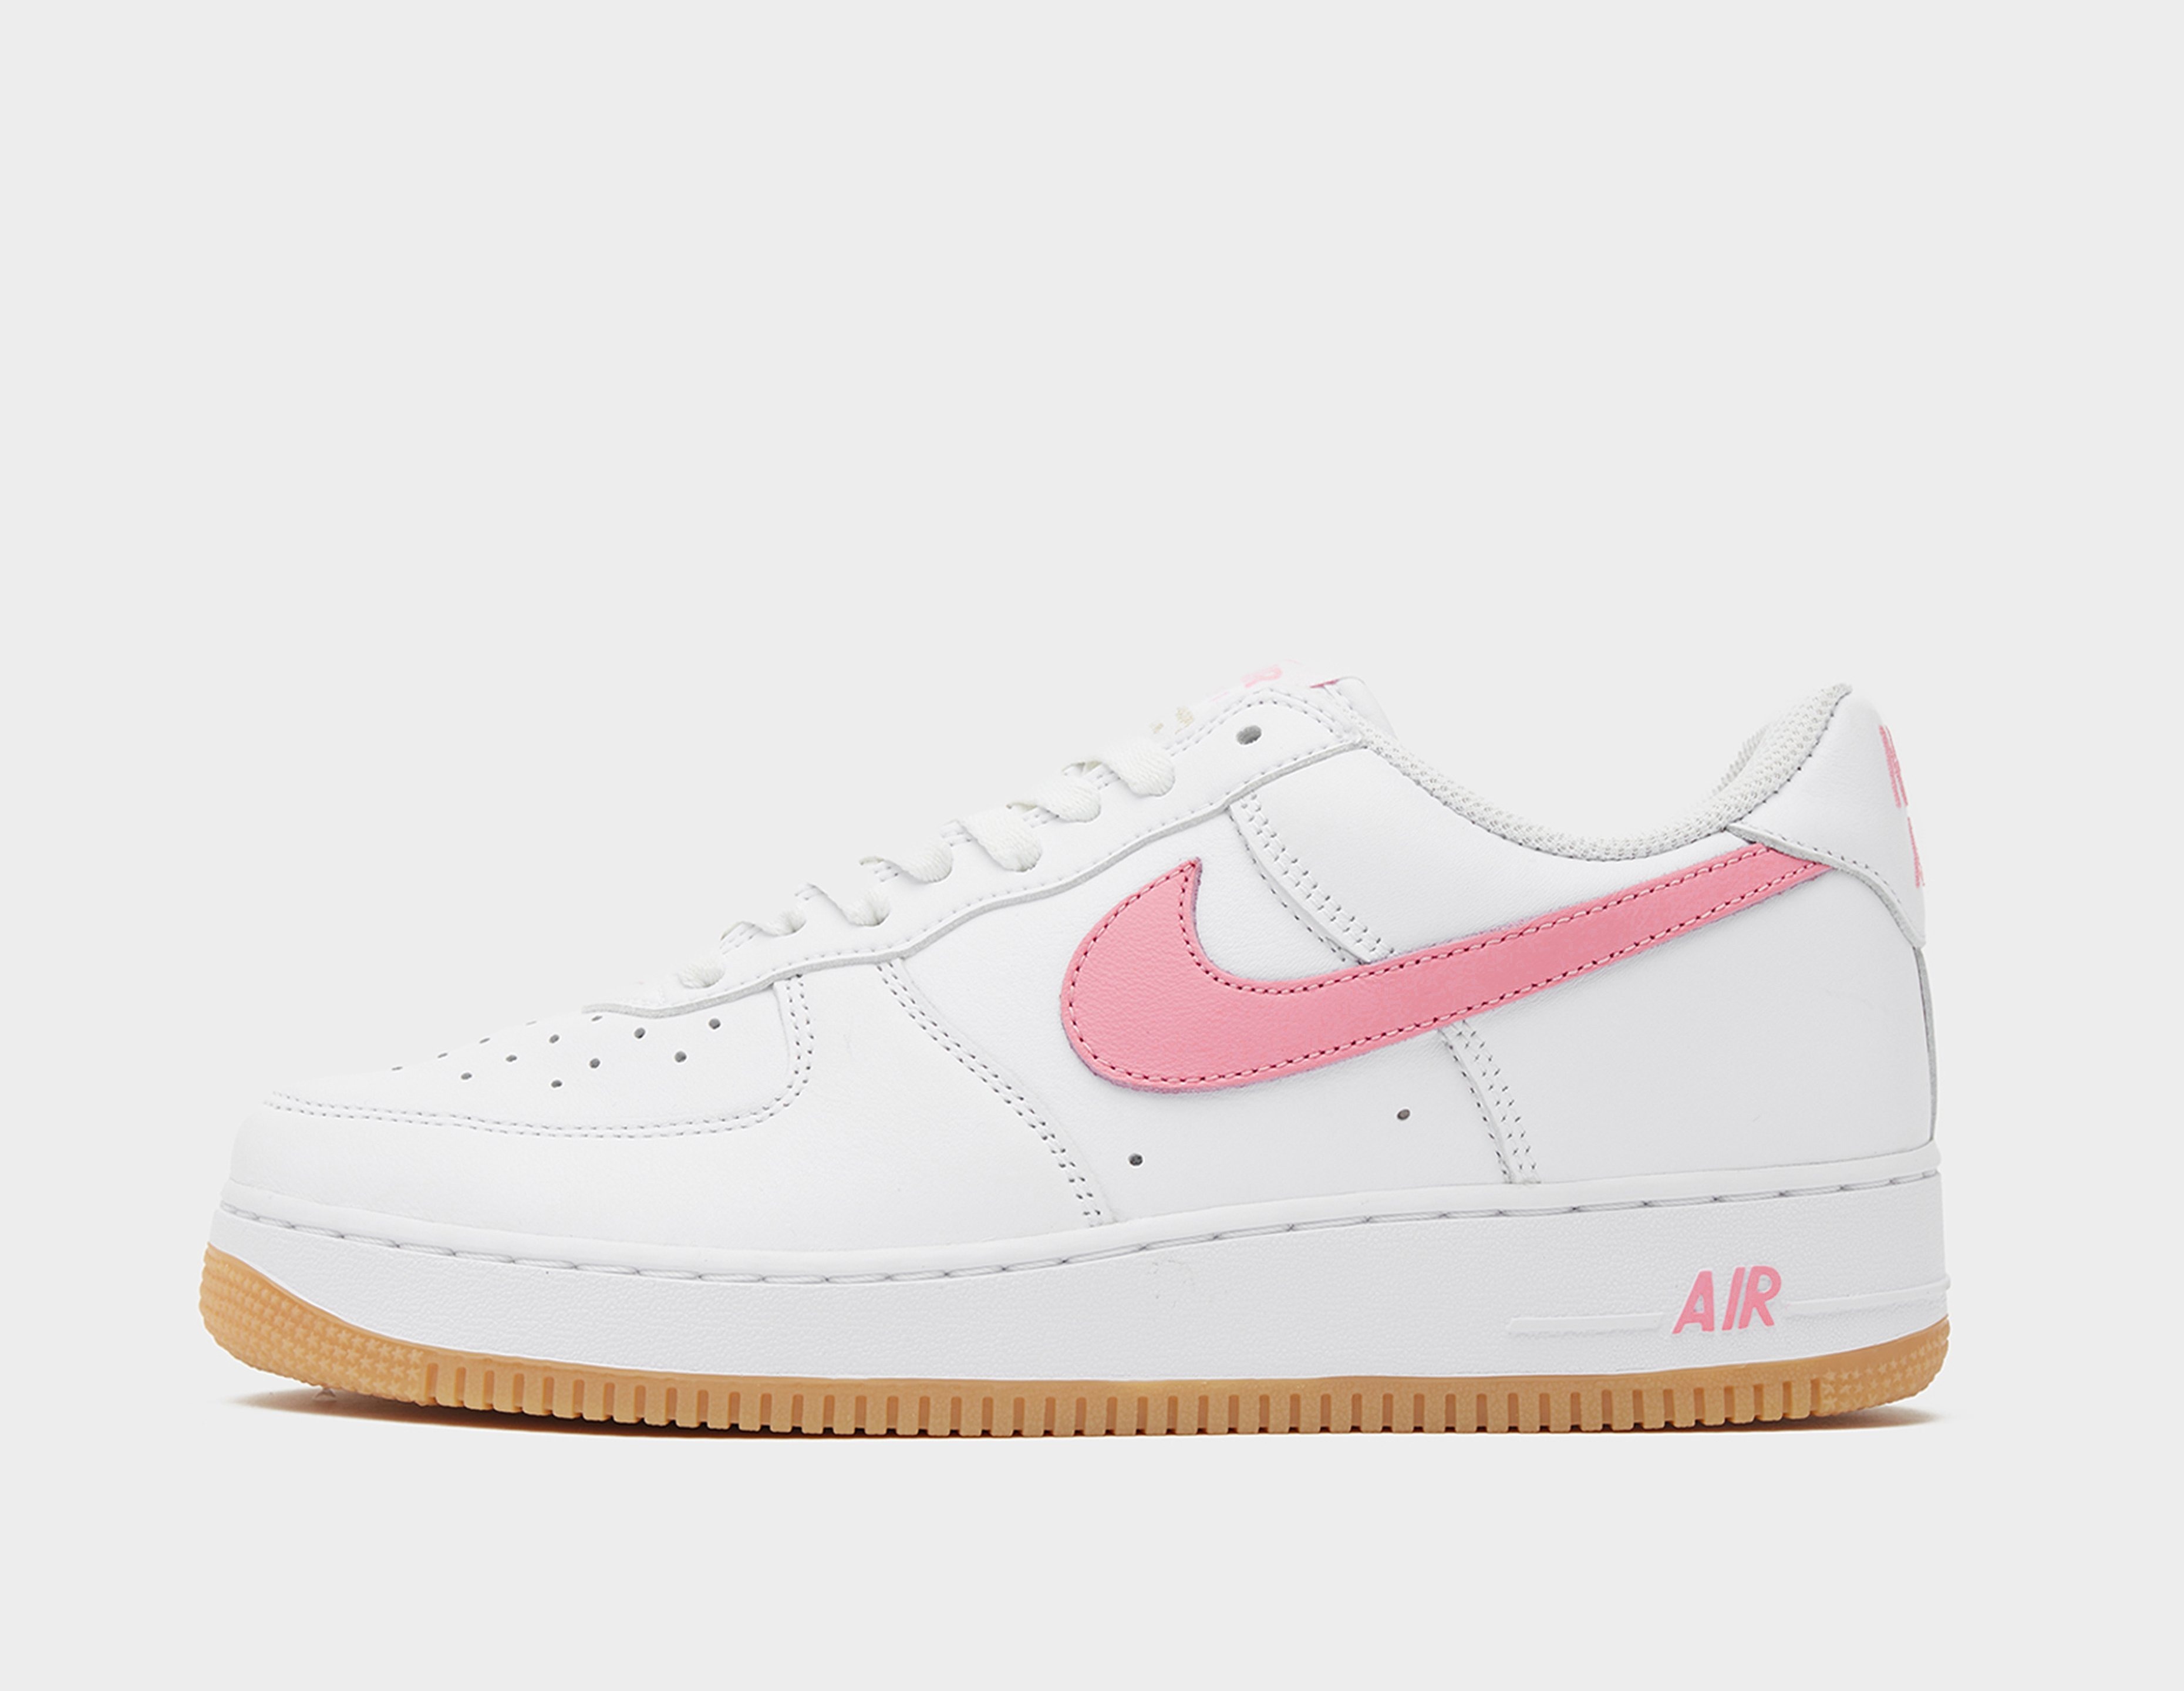 Nike Air Force 1 Low Retro, White | The Hoxton Trend